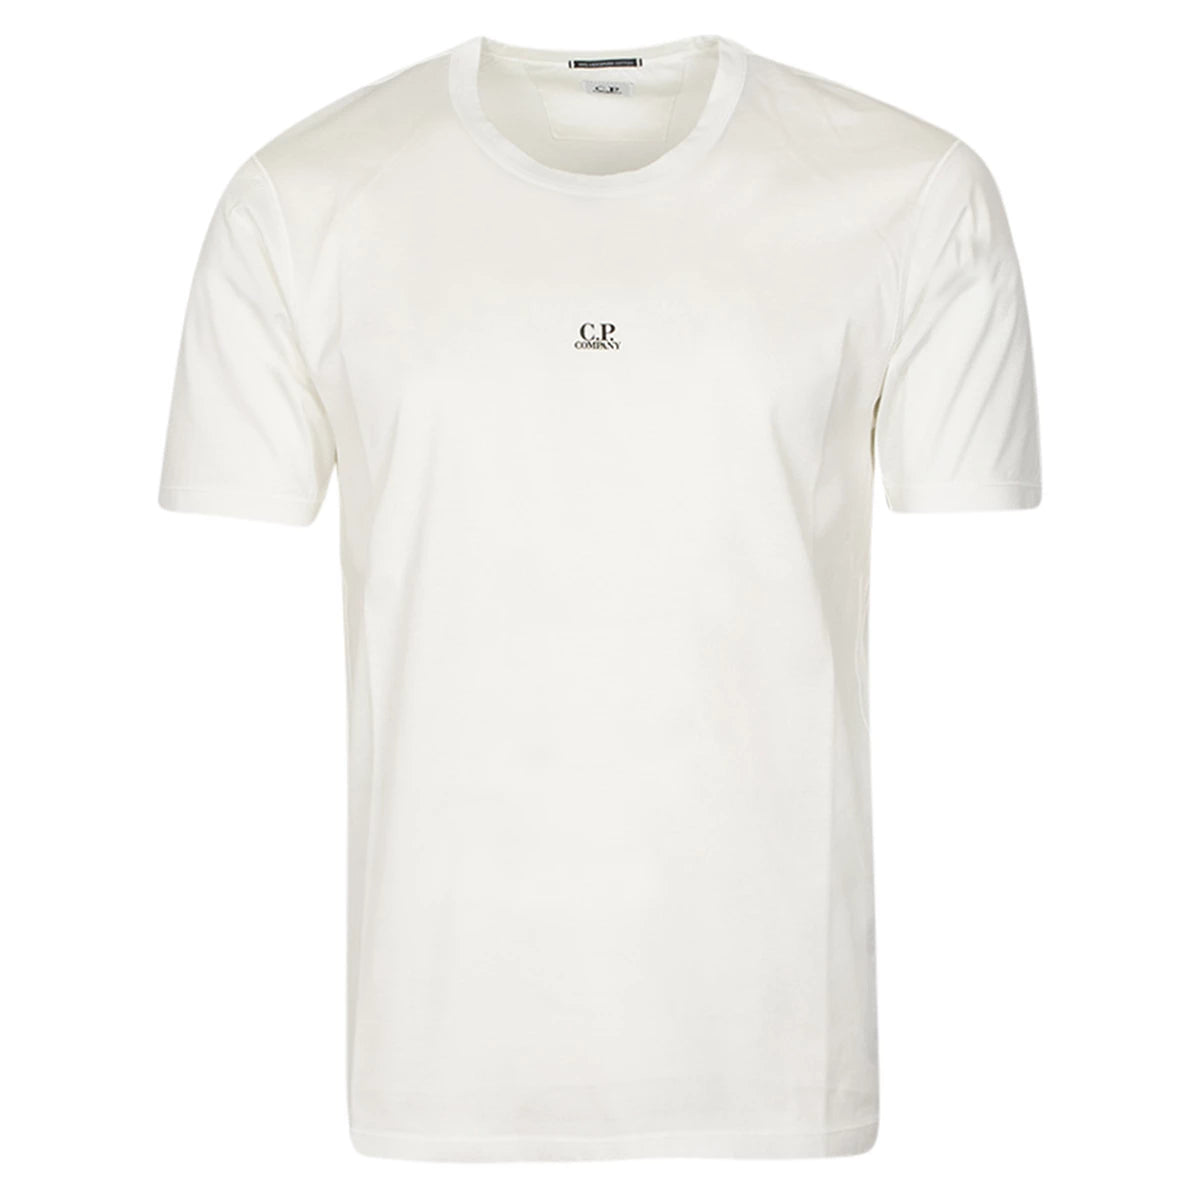 CP Company T-shirt off-white